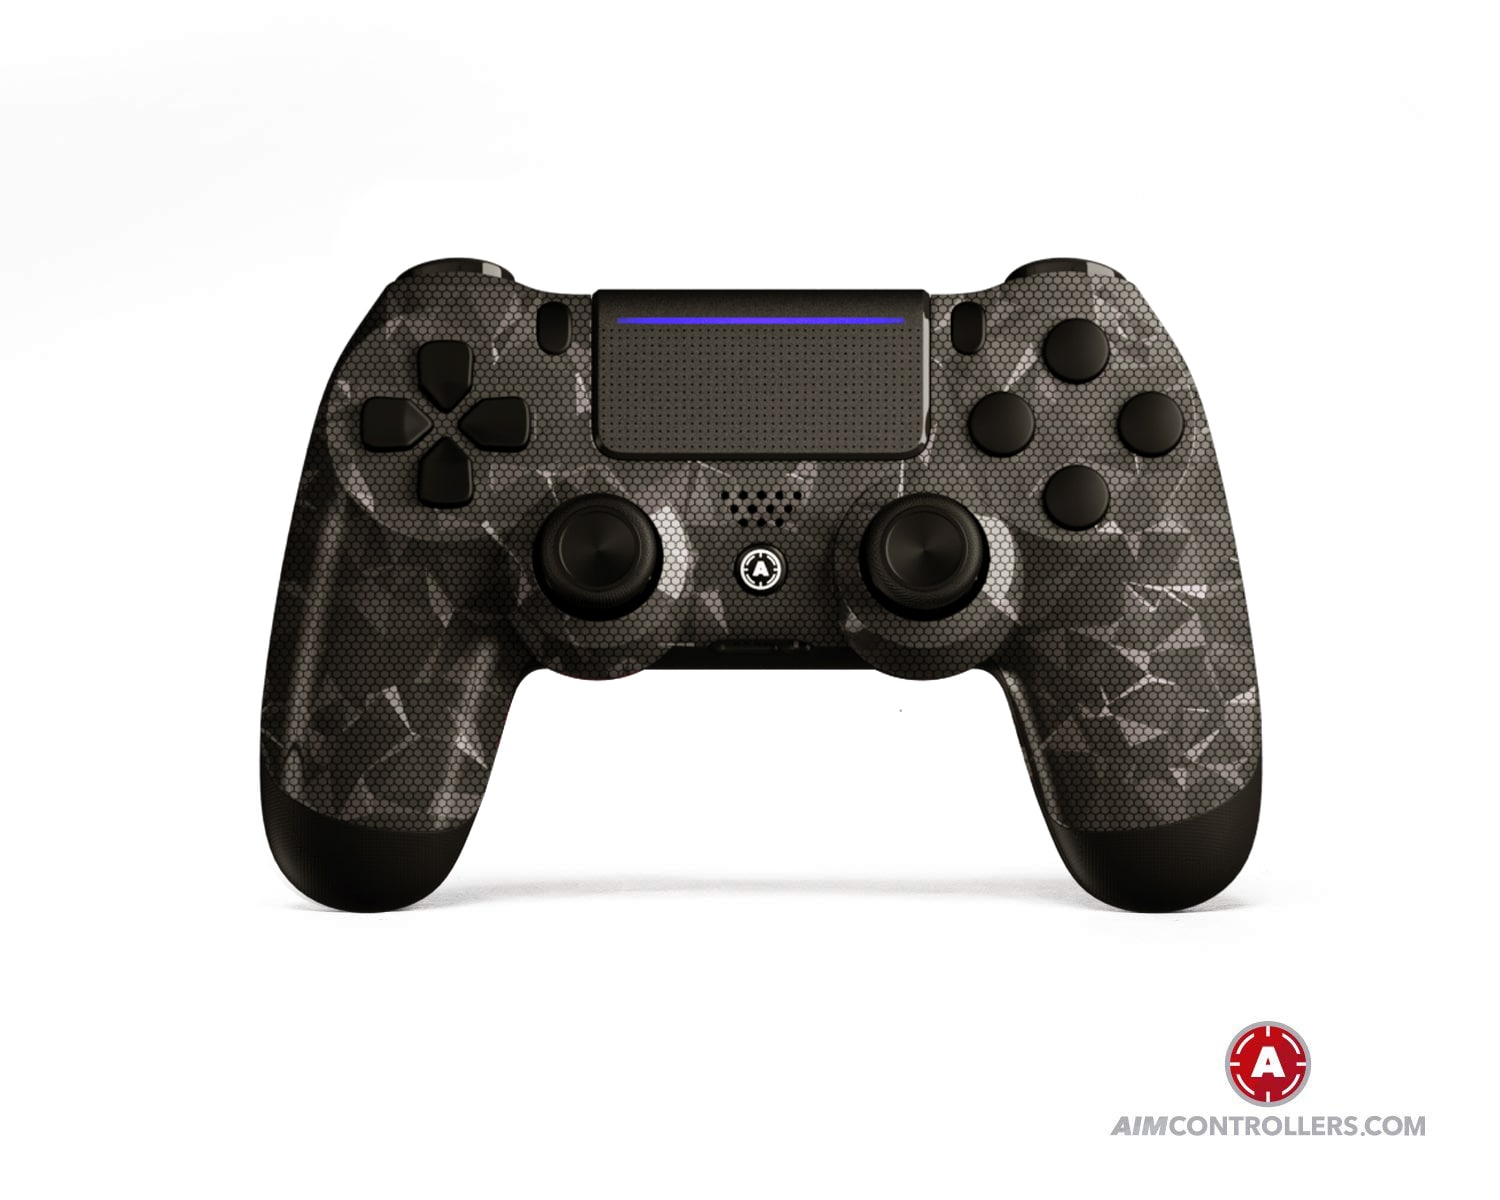 AimControllers Custom Dualshock 4 Aim Hologram with 4 Paddles. - 1